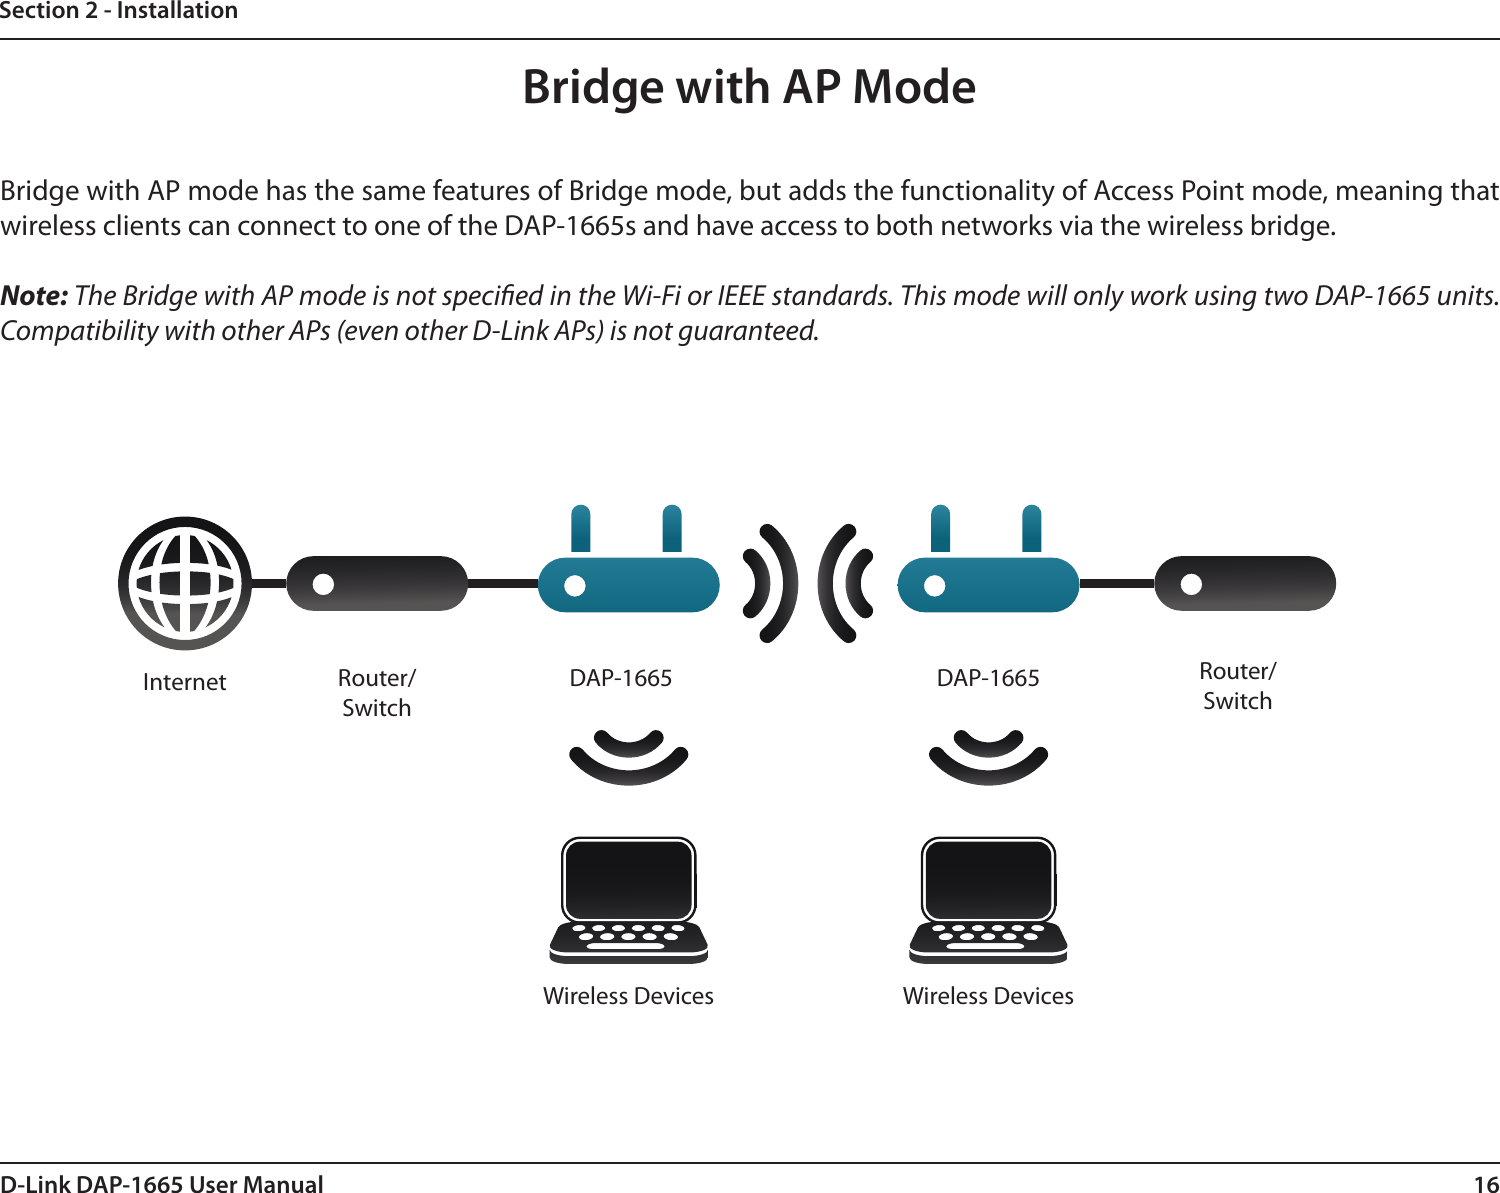 16D-Link DAP-1665 User ManualSection 2 - InstallationBridge with AP ModeBridge with AP mode has the same features of Bridge mode, but adds the functionality of Access Point mode, meaning that wireless clients can connect to one of the DAP-1665s and have access to both networks via the wireless bridge.Note: The Bridge with AP mode is not specied in the Wi-Fi or IEEE standards. This mode will only work using two DAP-1665 units. Compatibility with other APs (even other D-Link APs) is not guaranteed.Internet DAP-1665 DAP-1665 Router/SwitchRouter/SwitchWireless Devices Wireless Devices